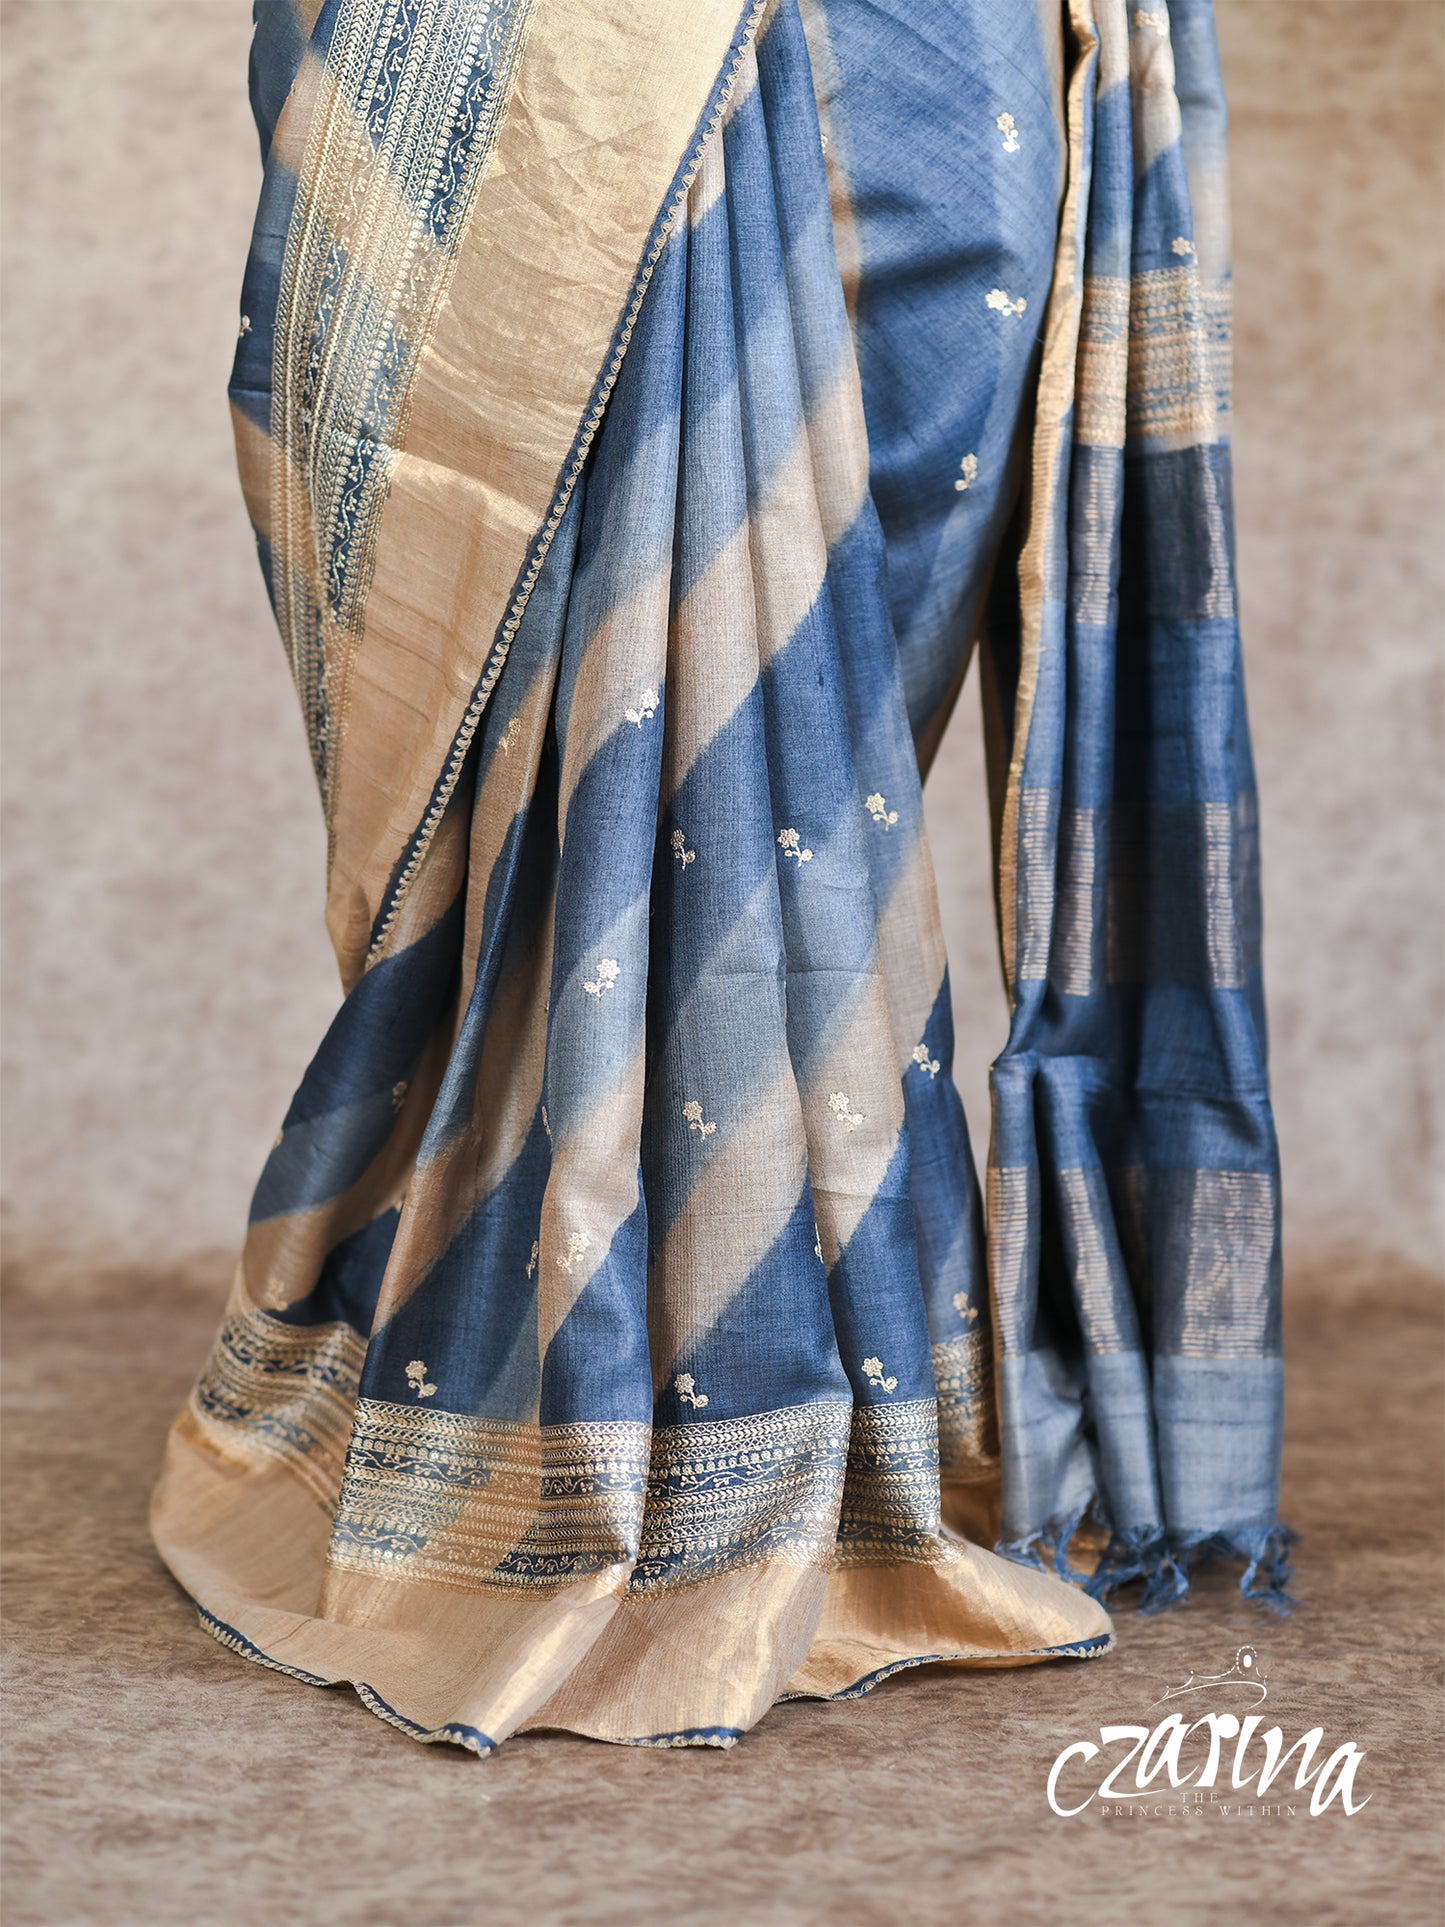 BLUE AND GREY SHADED WITH EMBROIDERY, ZARI BORDER TUSSAR SILK SAREE